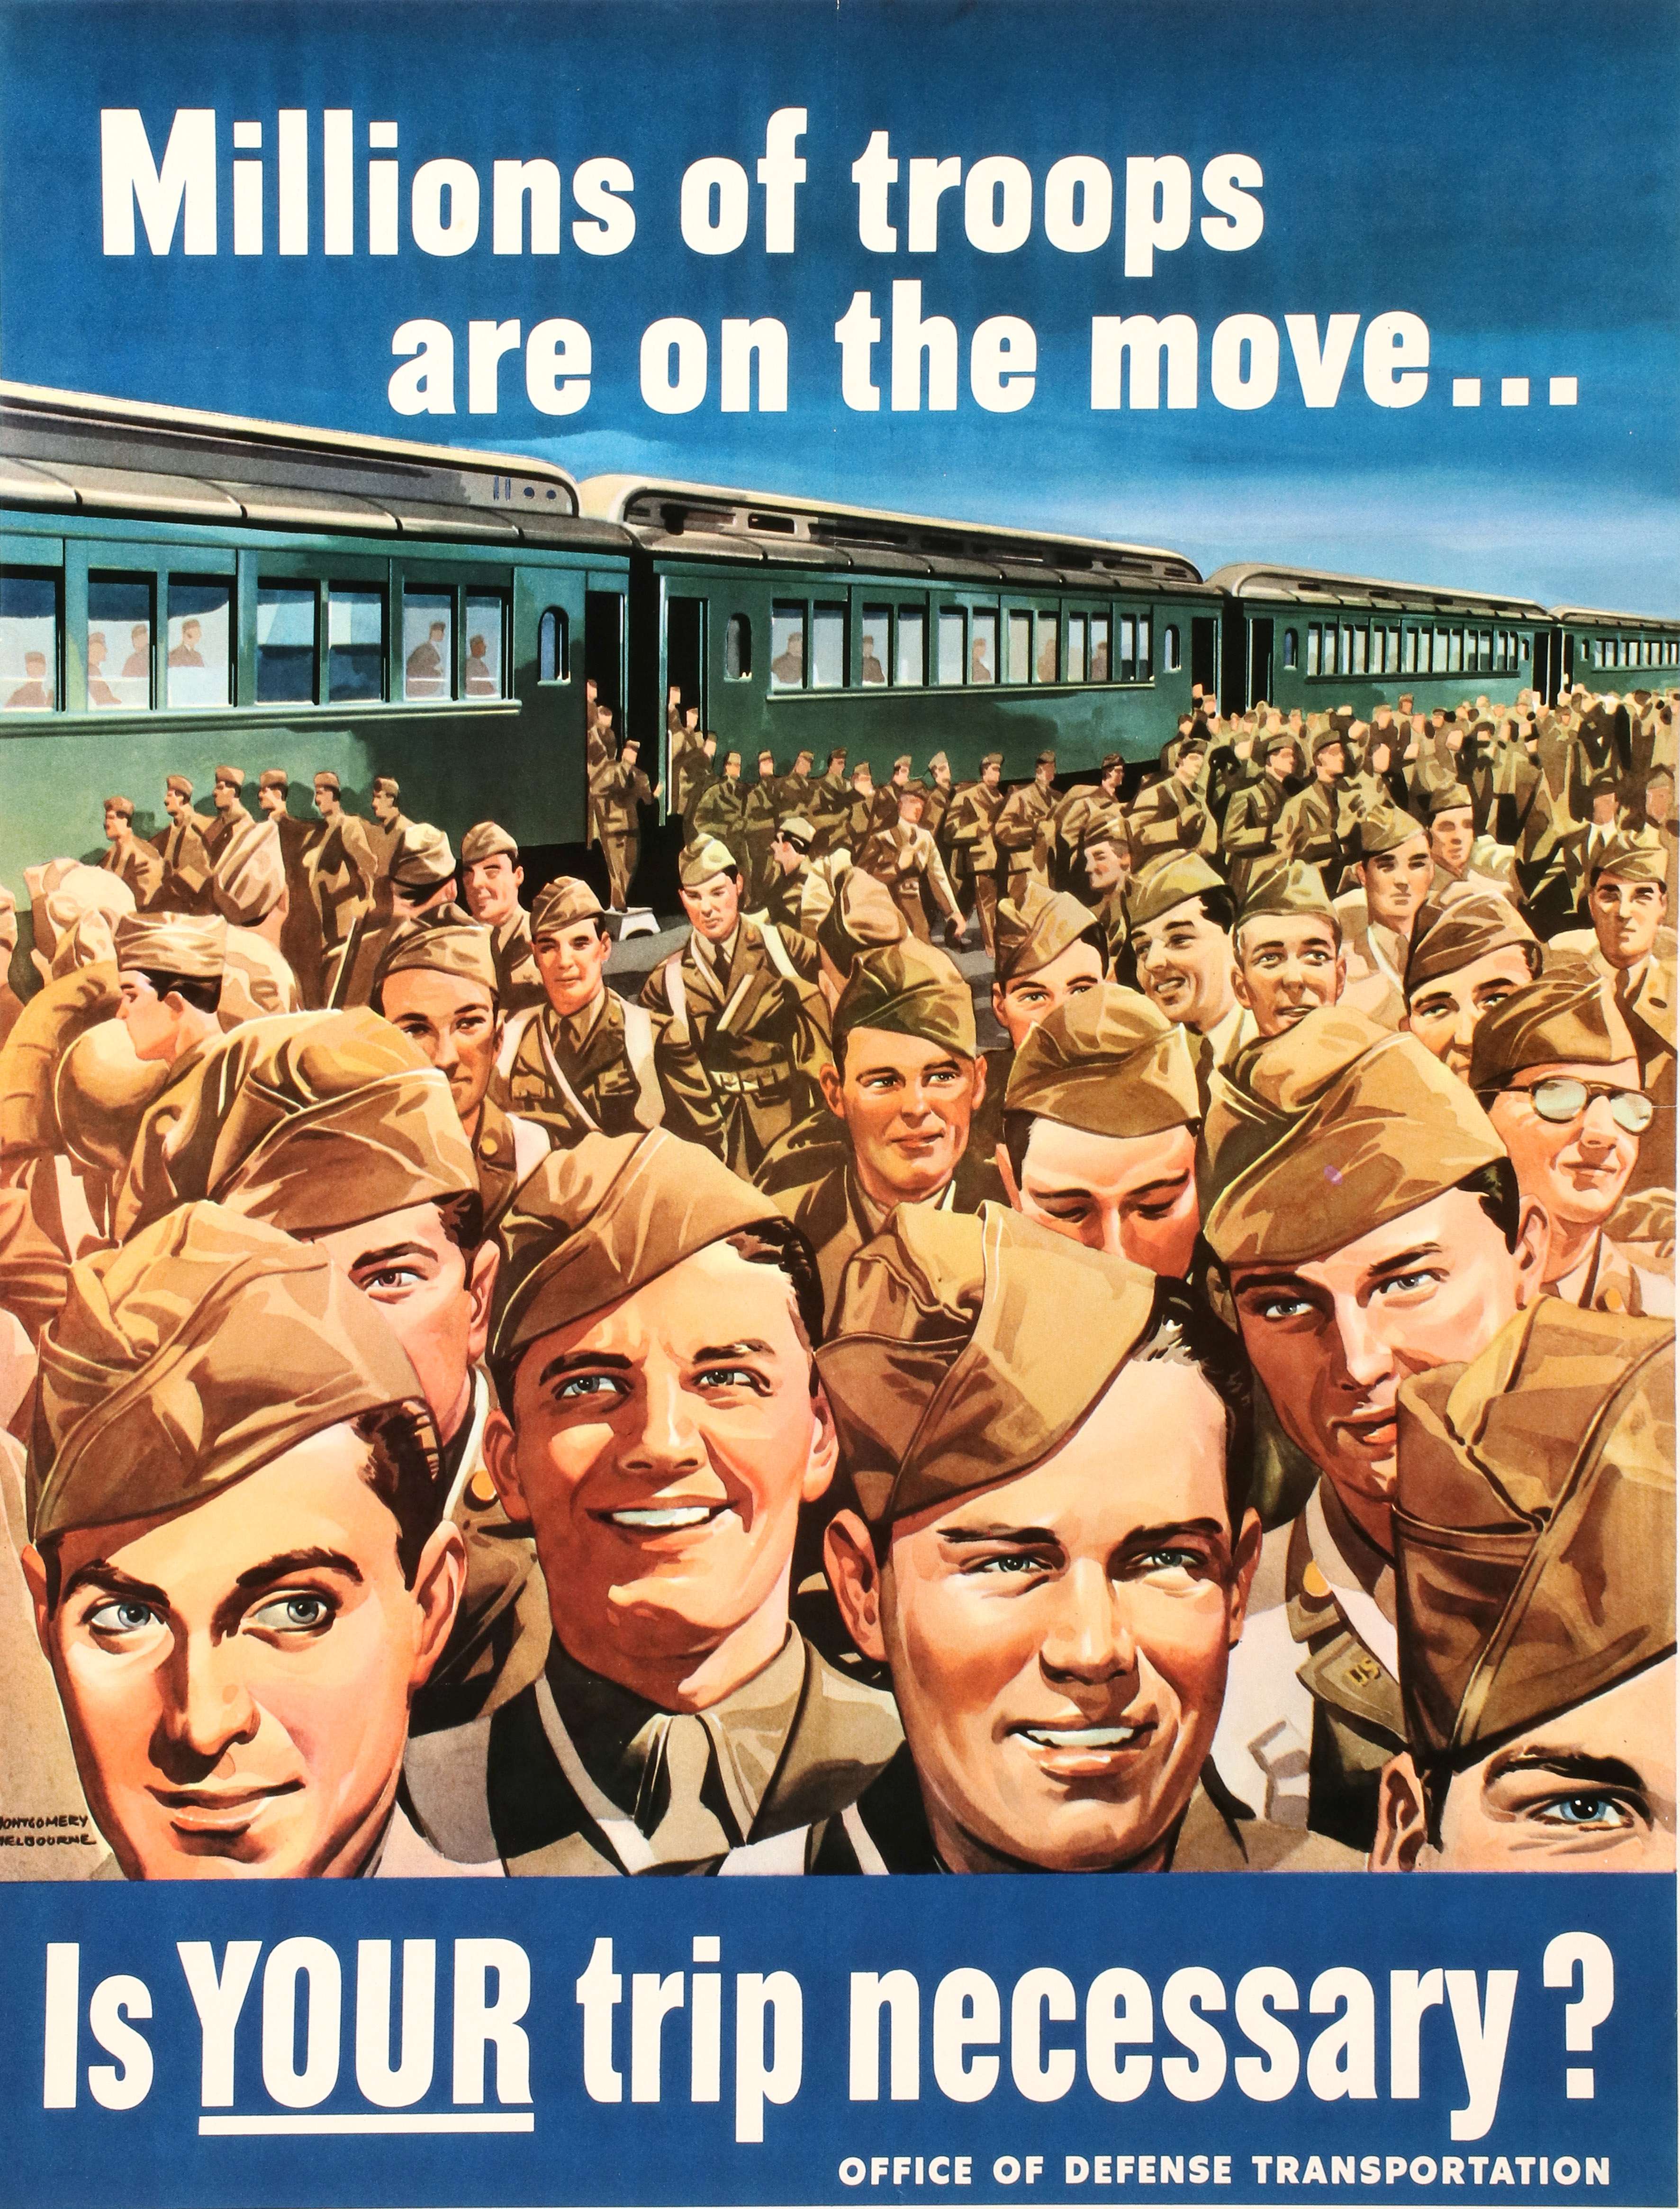 A WWII OFFICE OF DEFENSE TRANSPORTATION POSTER